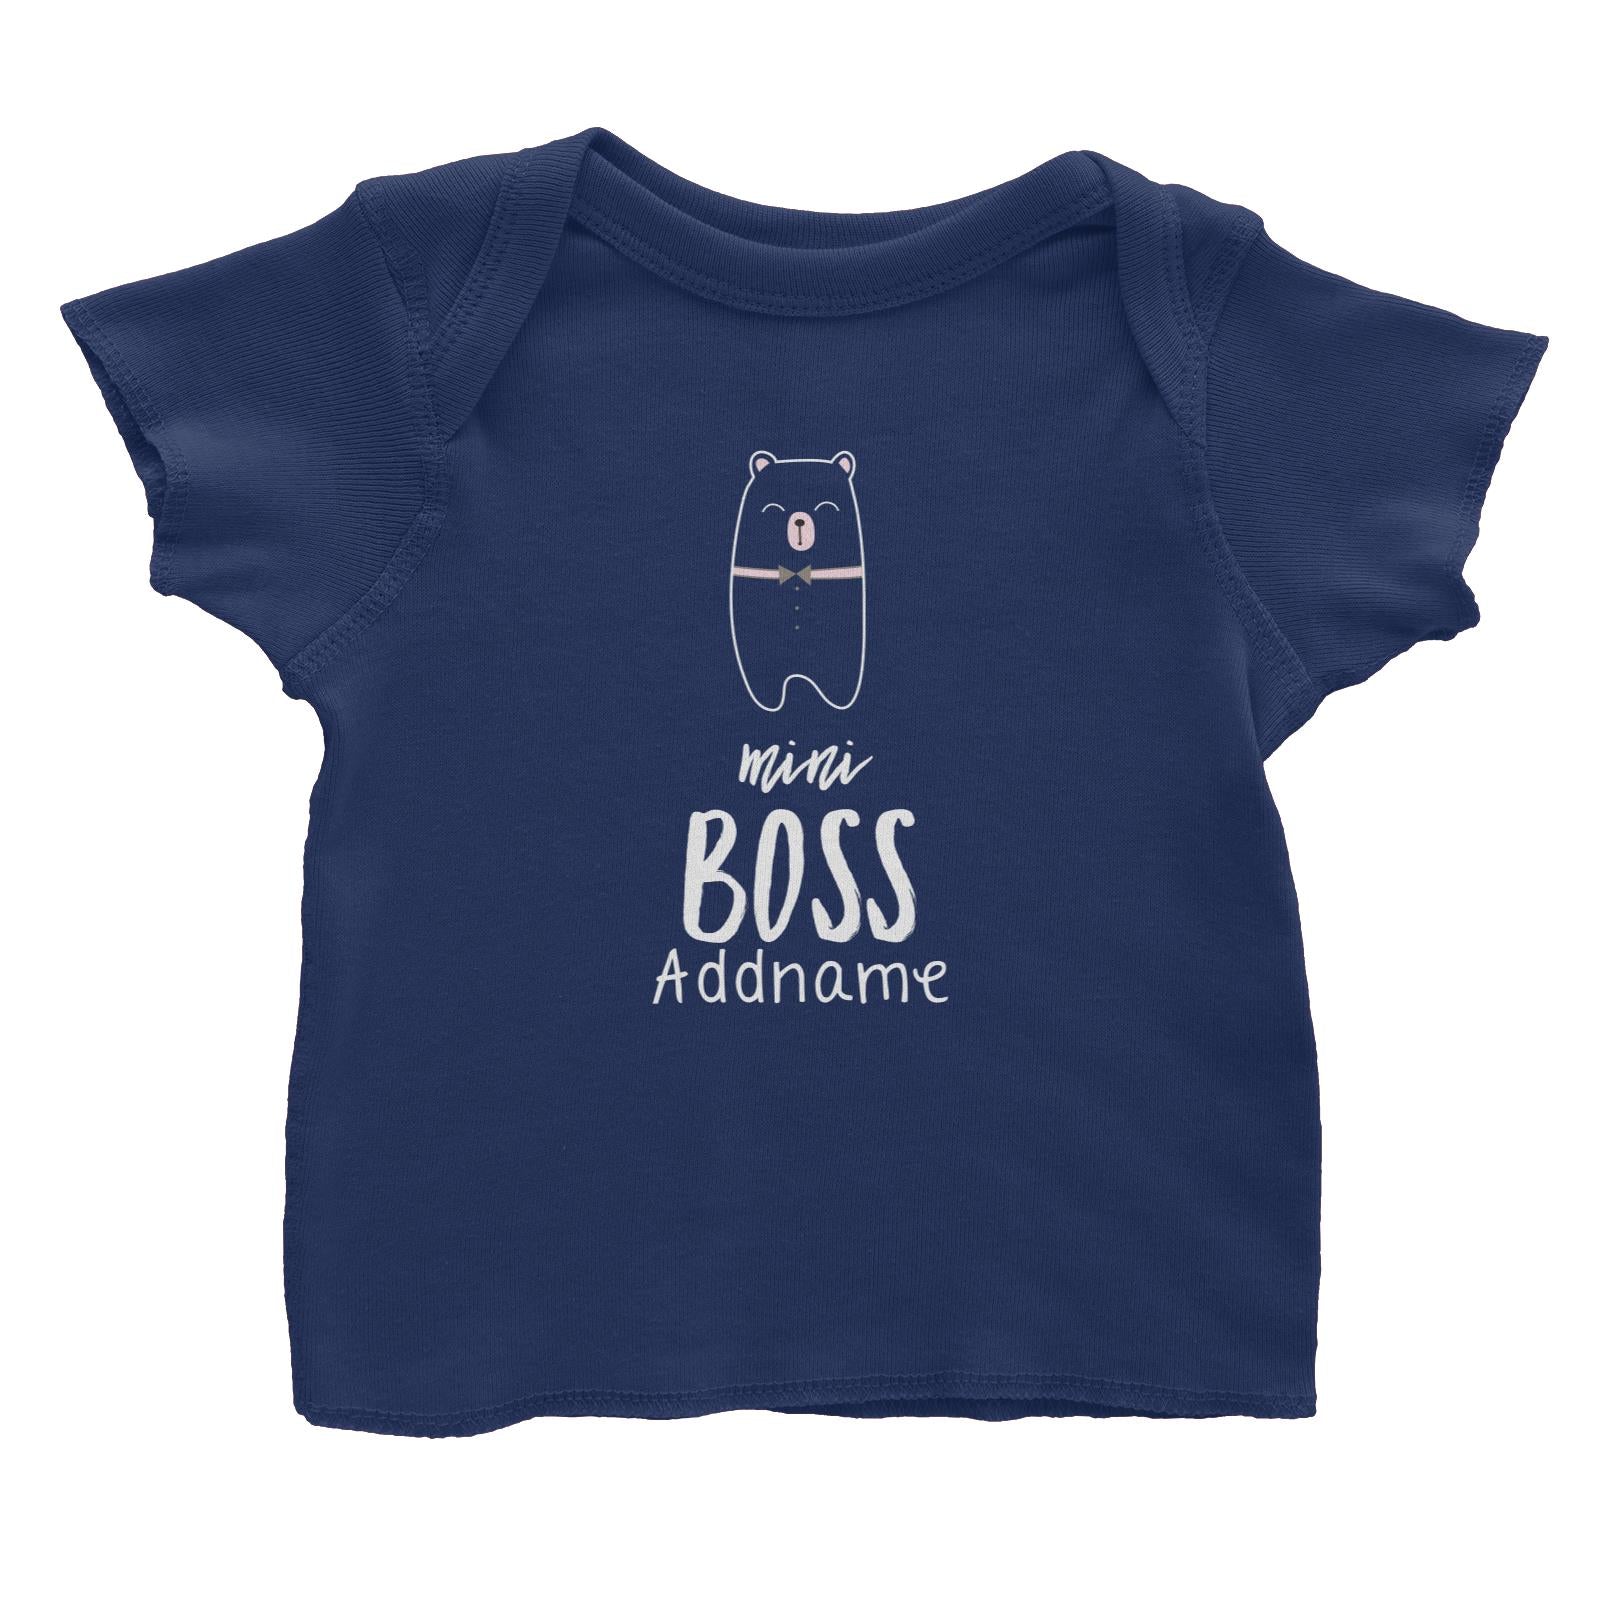 Cute Animals and Friends Series 2 Bear Mini Boss Addname Baby T-Shirt